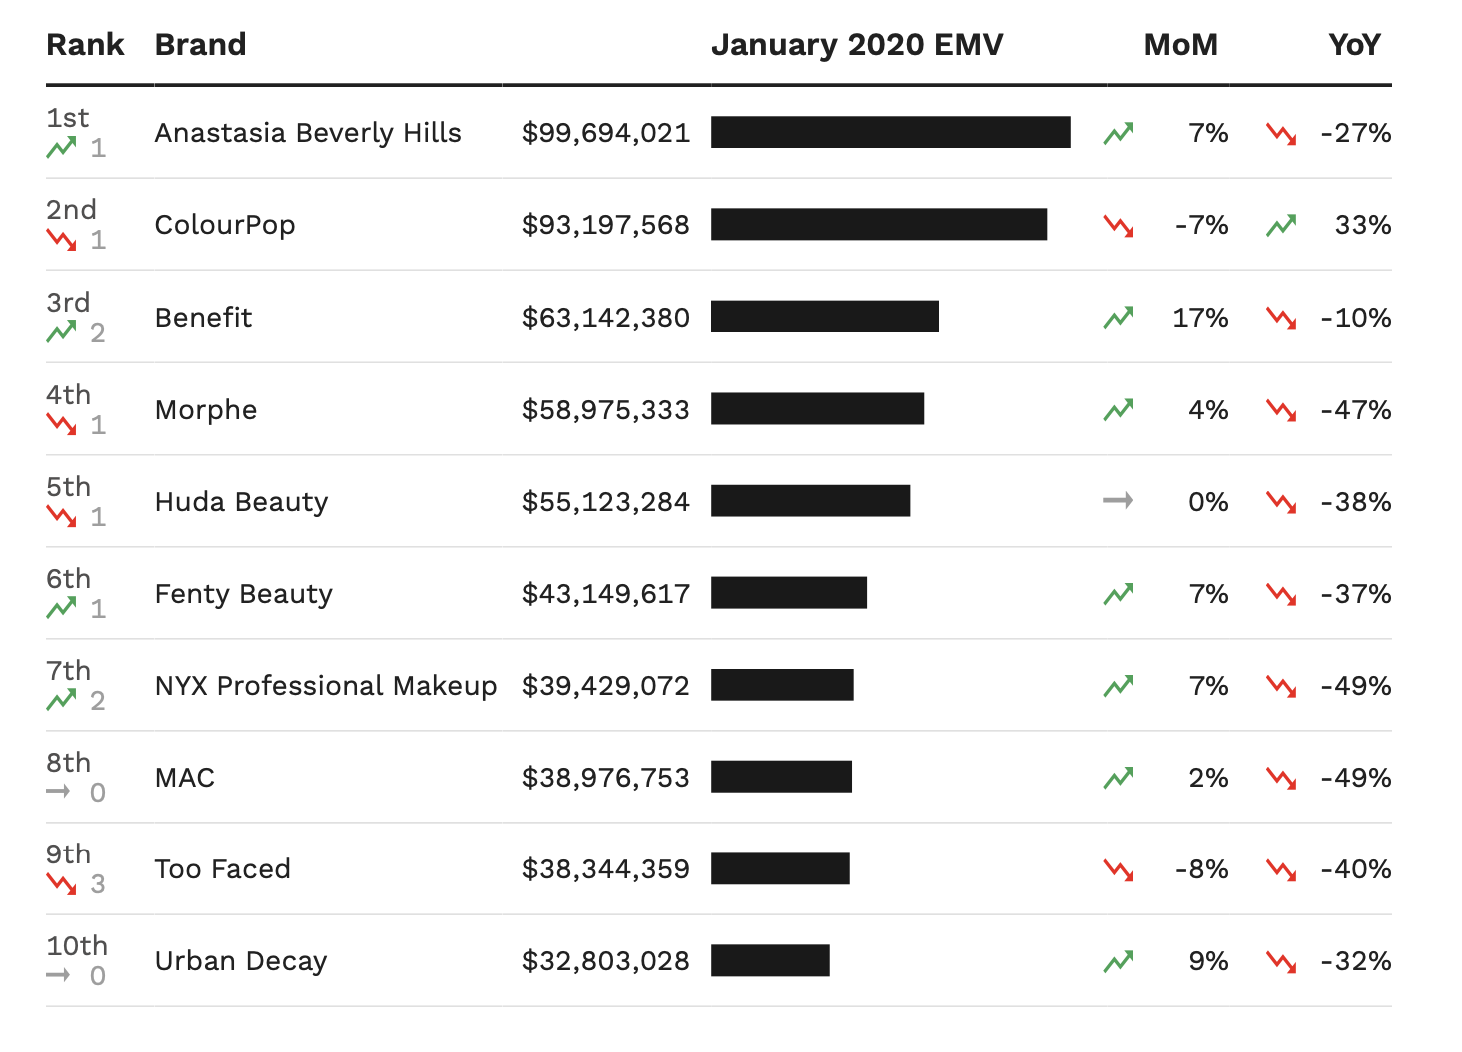 A chart showing the top 10 makeup brands in the U.S. by January EMV performance.